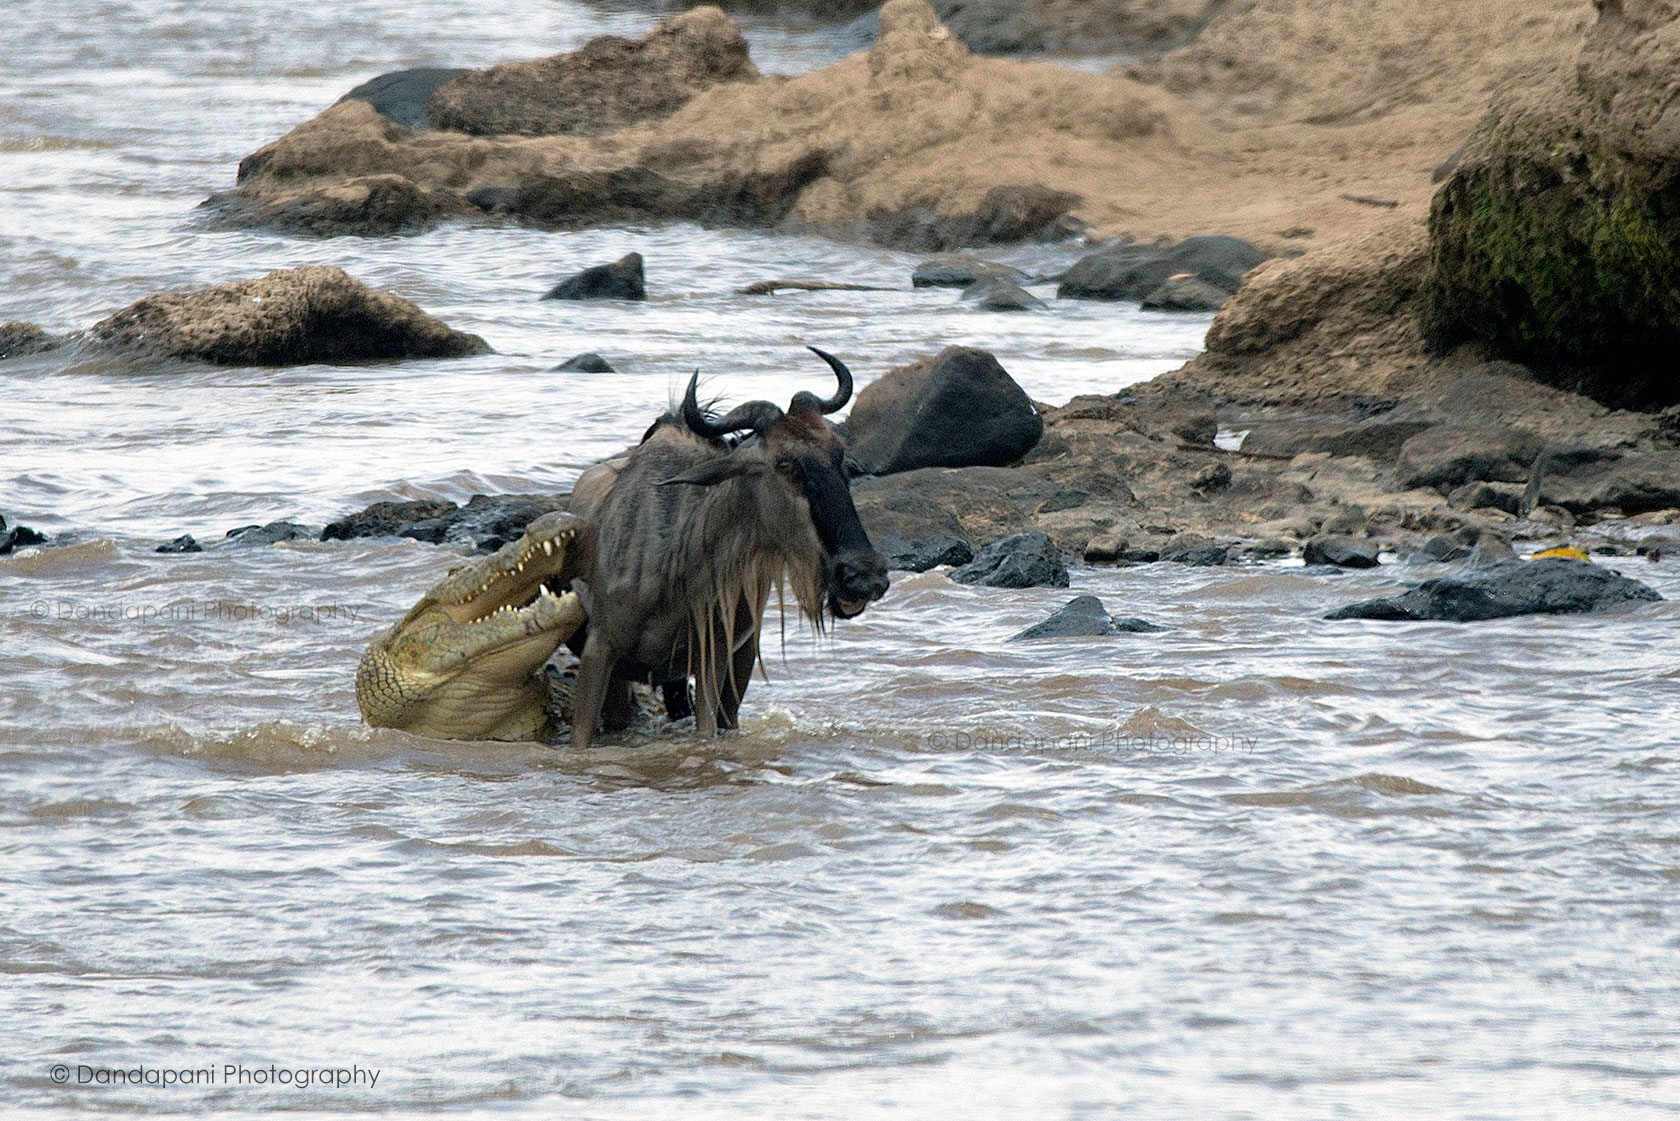 In August 2016, during a visit to the Maasai Mara in Kenya, I got to witness the Great Migration. One scene stood out more than any other - this fight between a crocodile and a wildebeest. After what seemed like an endless battle the wildebeest escaped.